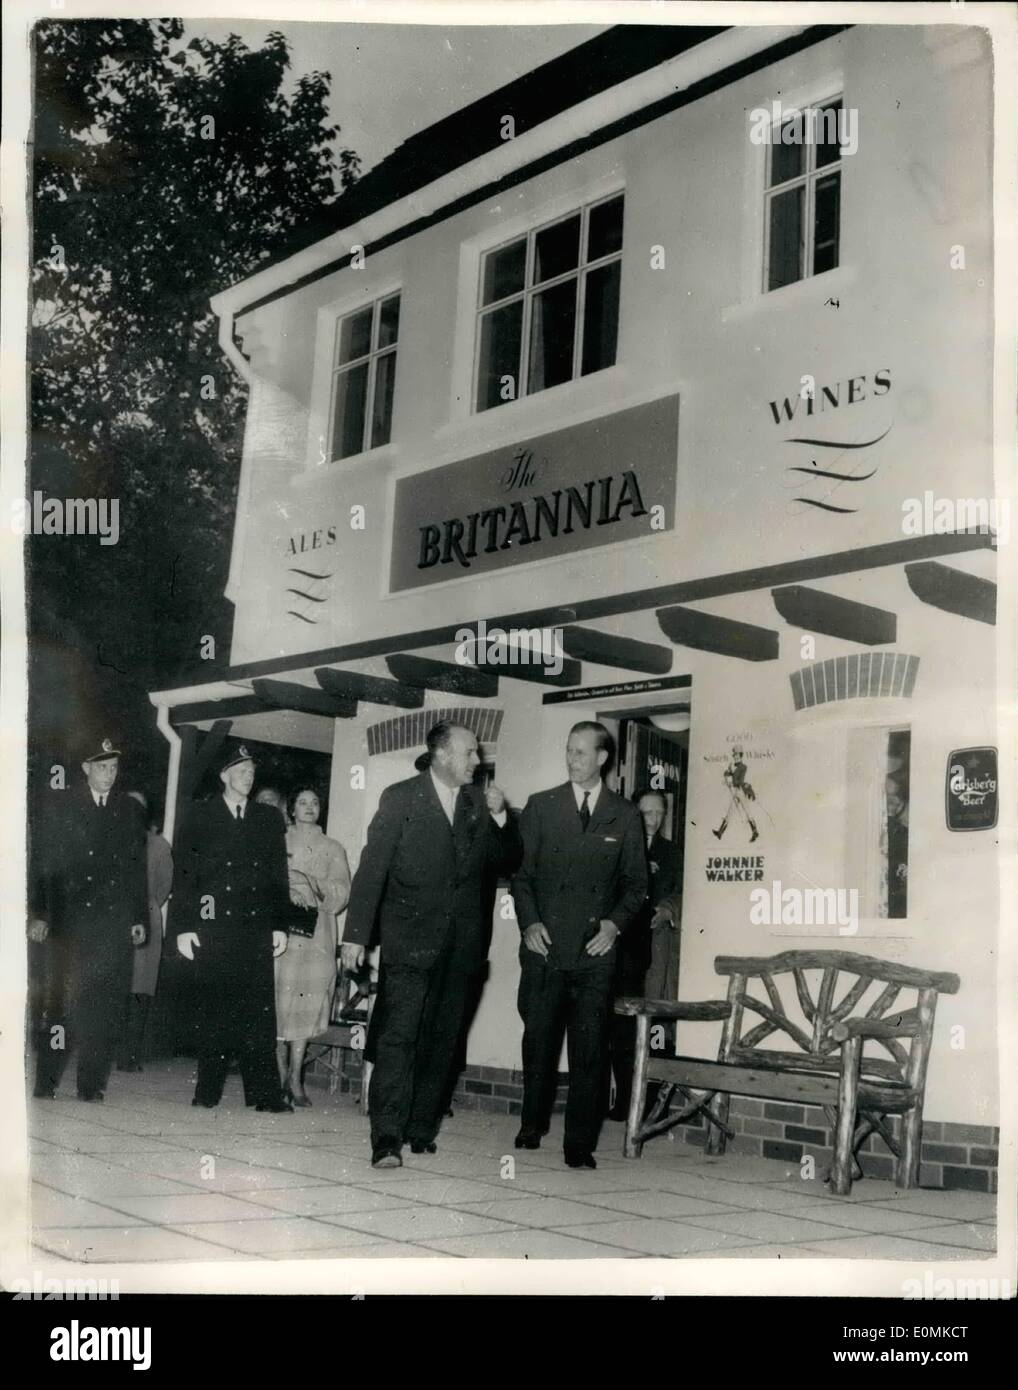 Oct. 10, 1955 - The Duke of Edinburgh Visits The British Trade Fair in Copenhagen: The Duke of Edinburgh, who is in Denmark on a five-day visit, paid a visit to the British Trade Fair in Copenhagen. He spent two hours touring the exhibition and visited the British Inn Britania, where he had a beer in a silver tankard, which was afterwards given him as a souvenir. Photo shows The Duke of Edinburgh leaving the British Inn Britania. Stock Photo